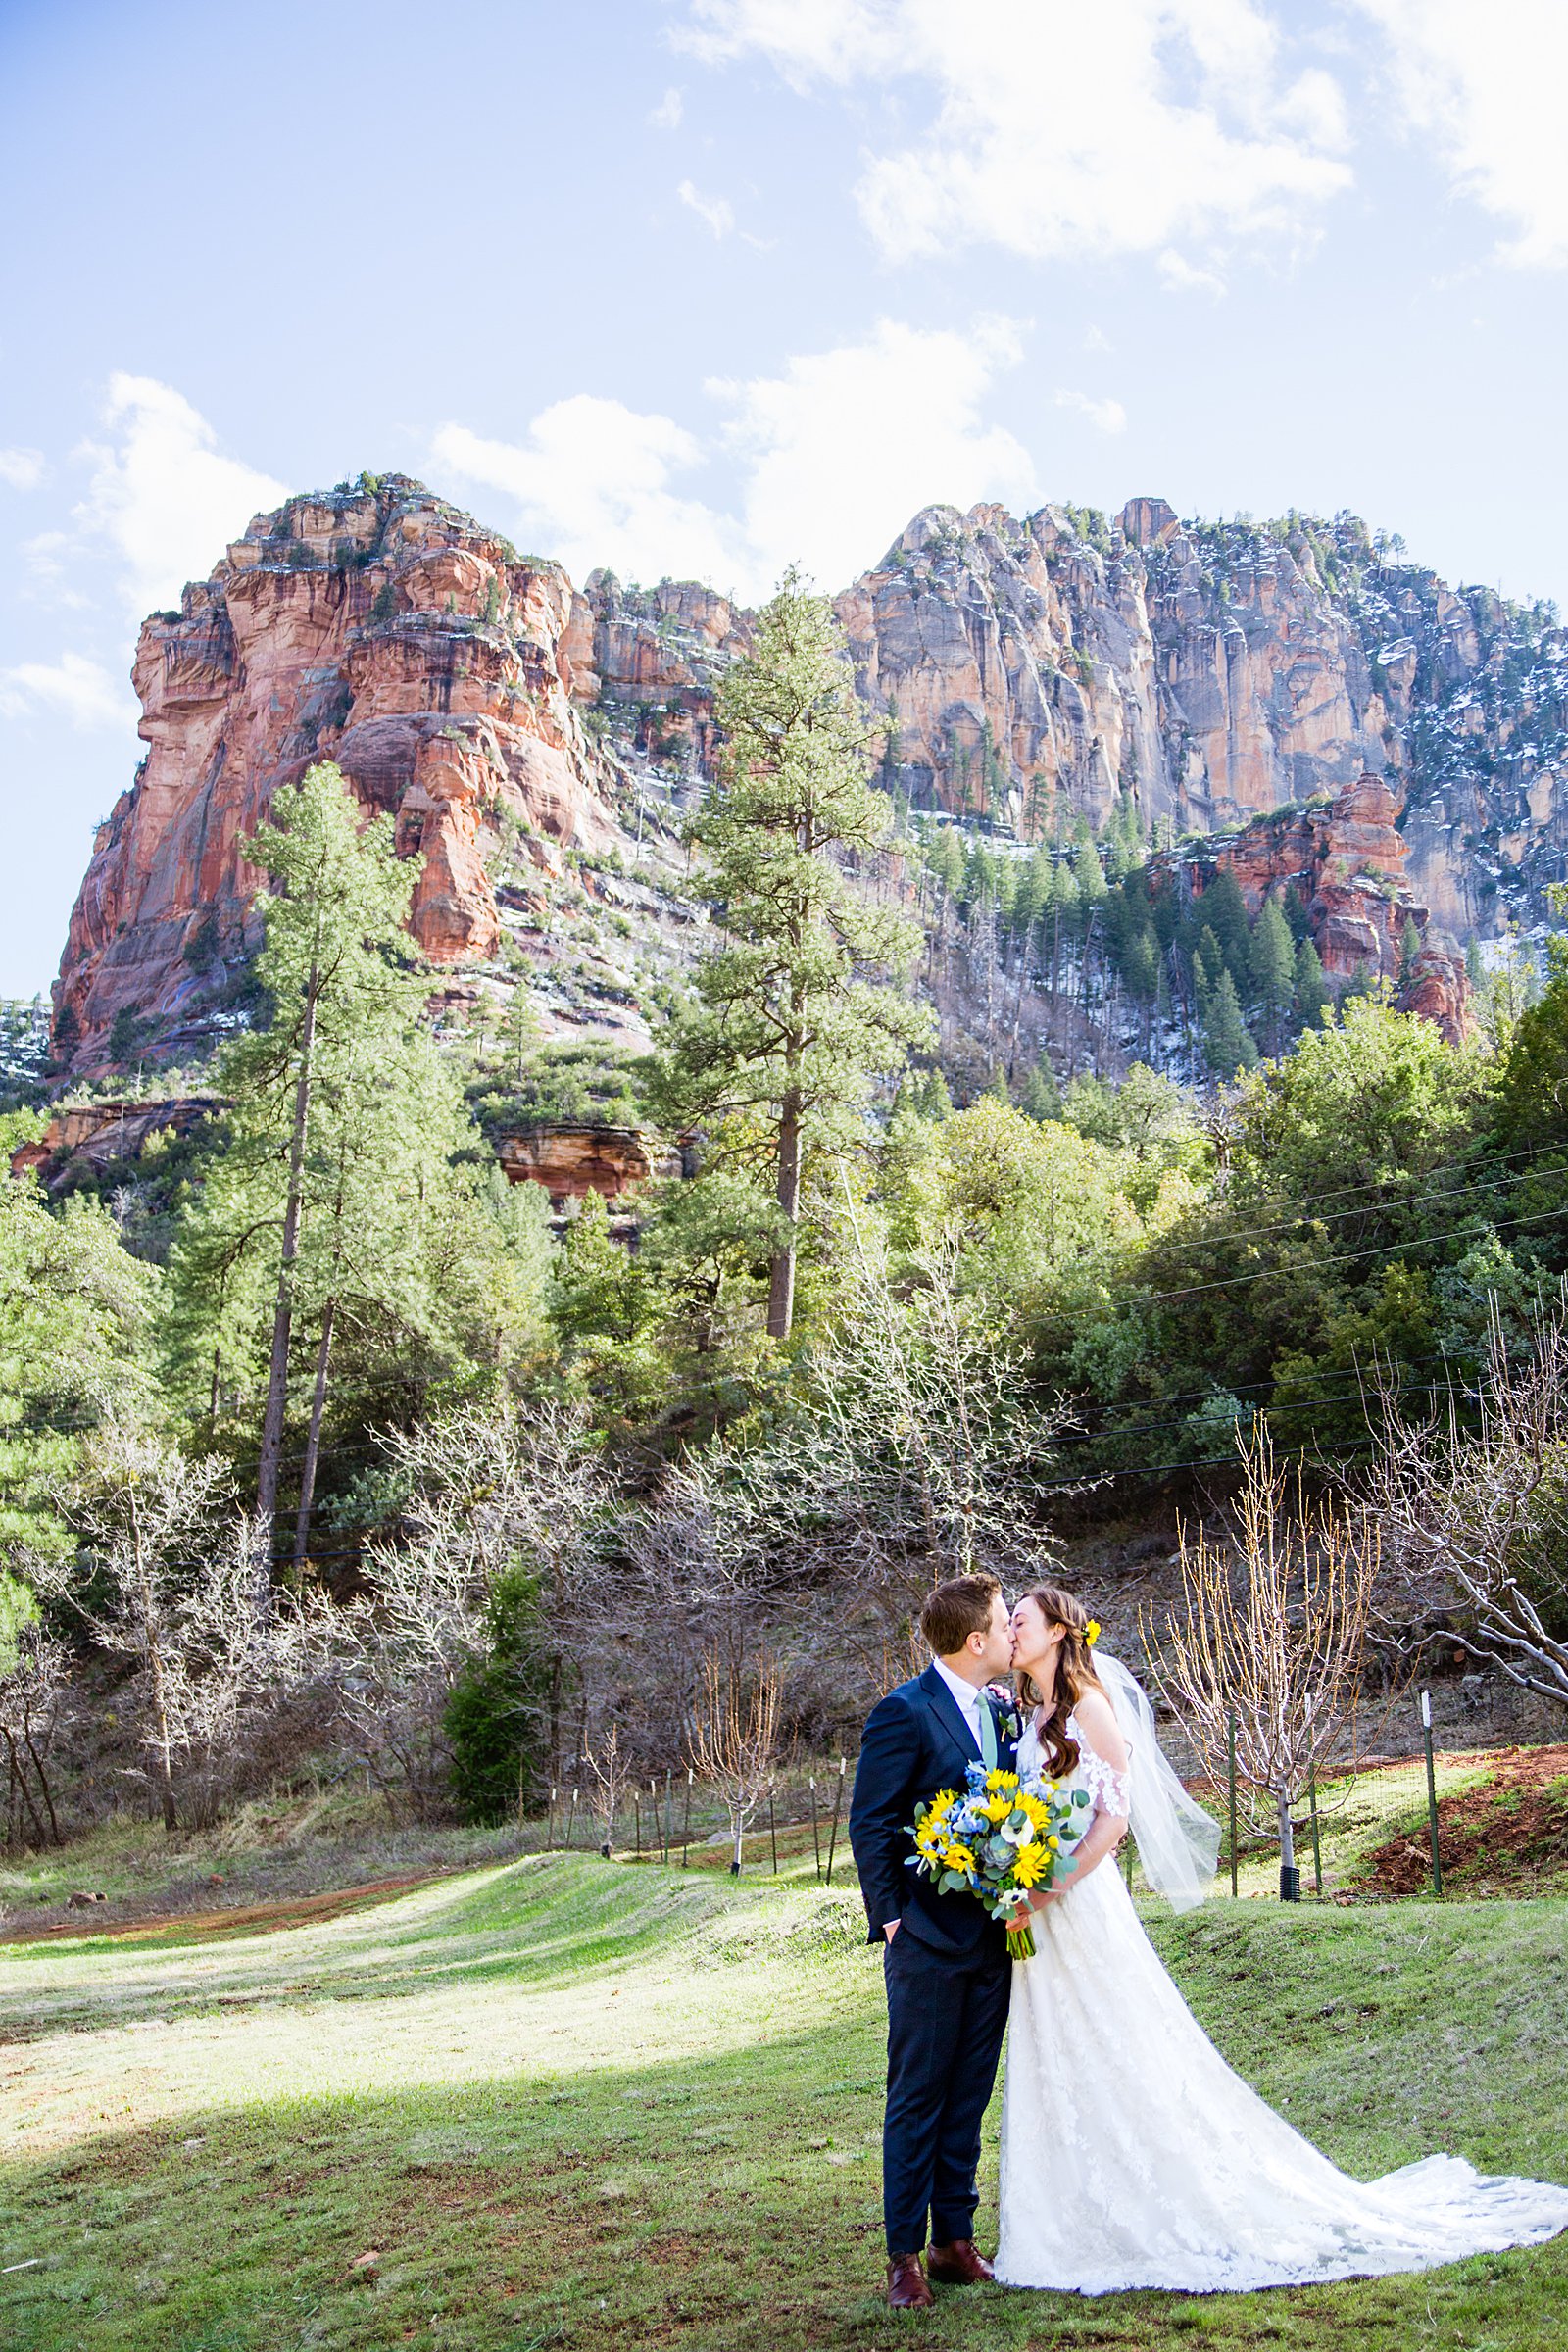 Bride and Groom share a kiss during their Slide Rock elopement by Sedona elopement photographer PMA Photography.